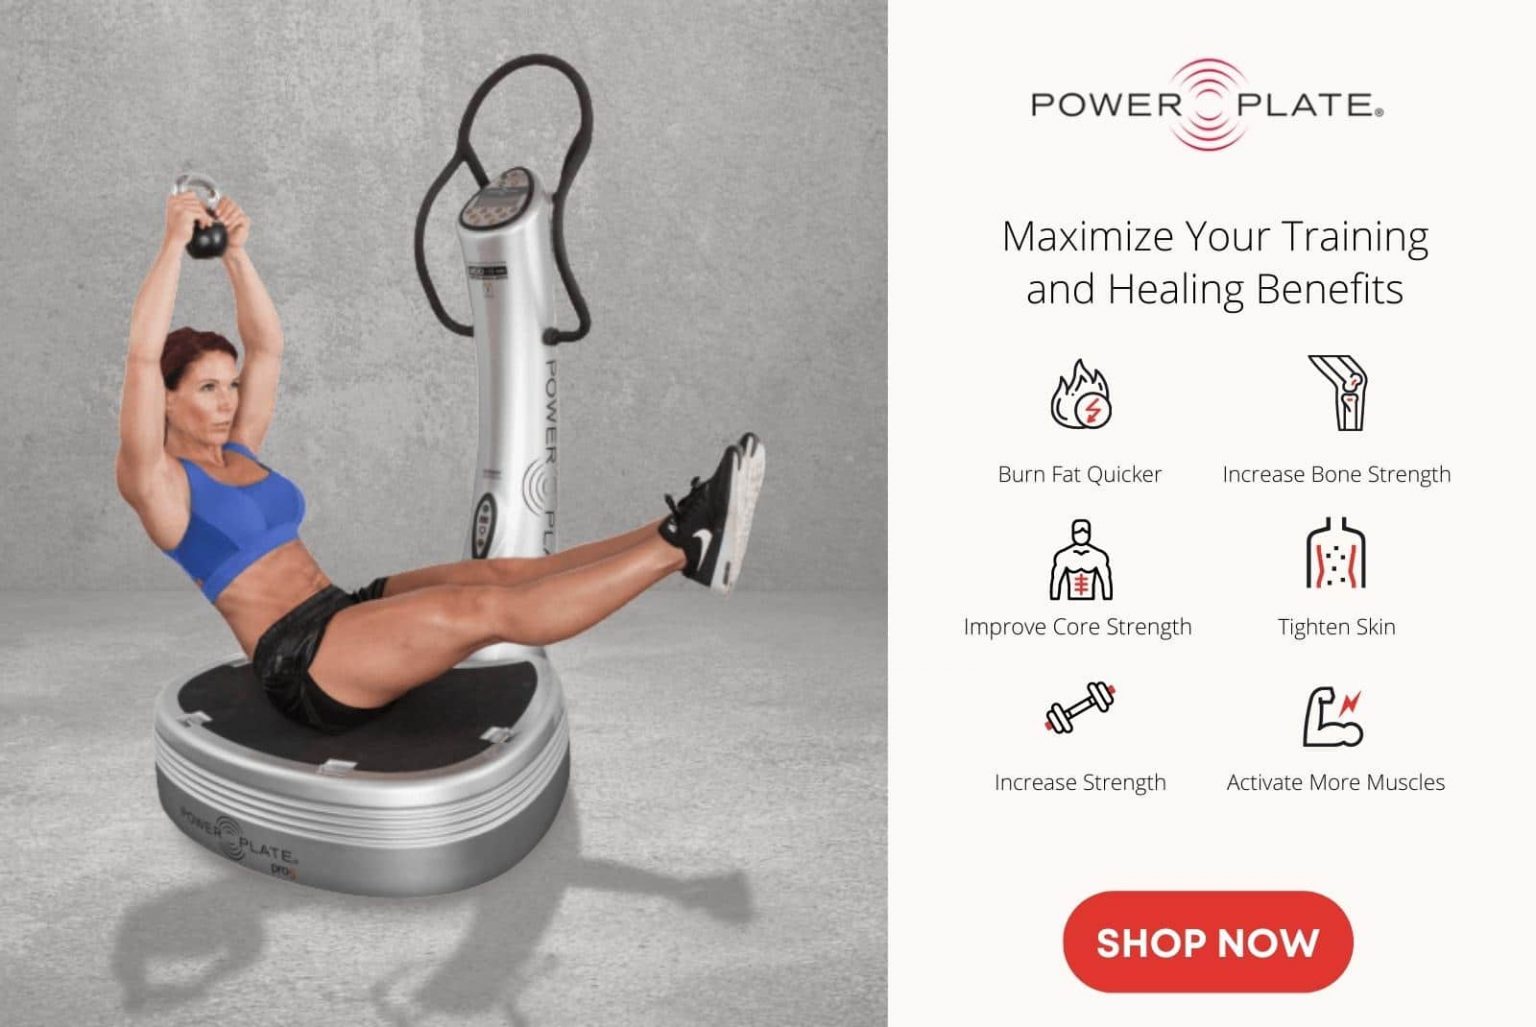 Maximize your training and health benefits with the Power Plate pro5